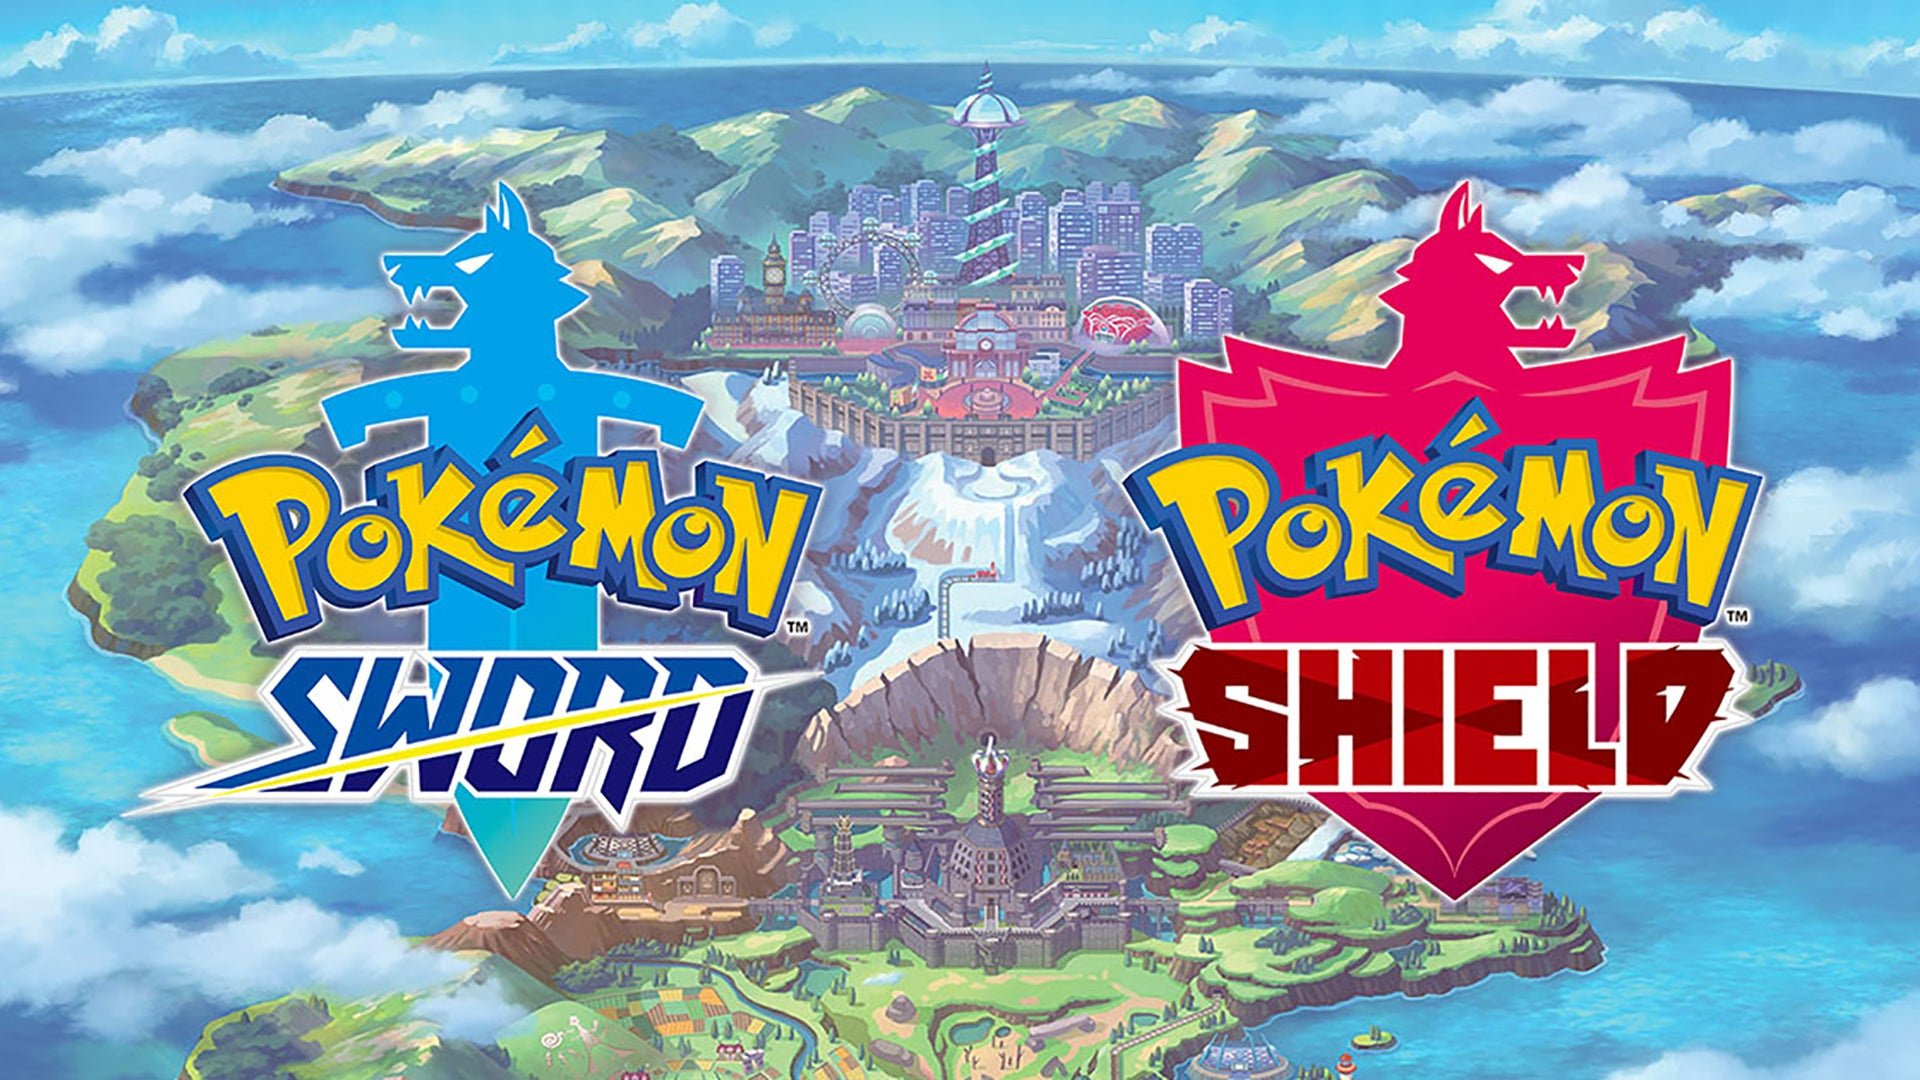 Poll Pokemon Sword And Shield Launched A Year Ago Has Your Opinion On Them Changed Nintendo Life